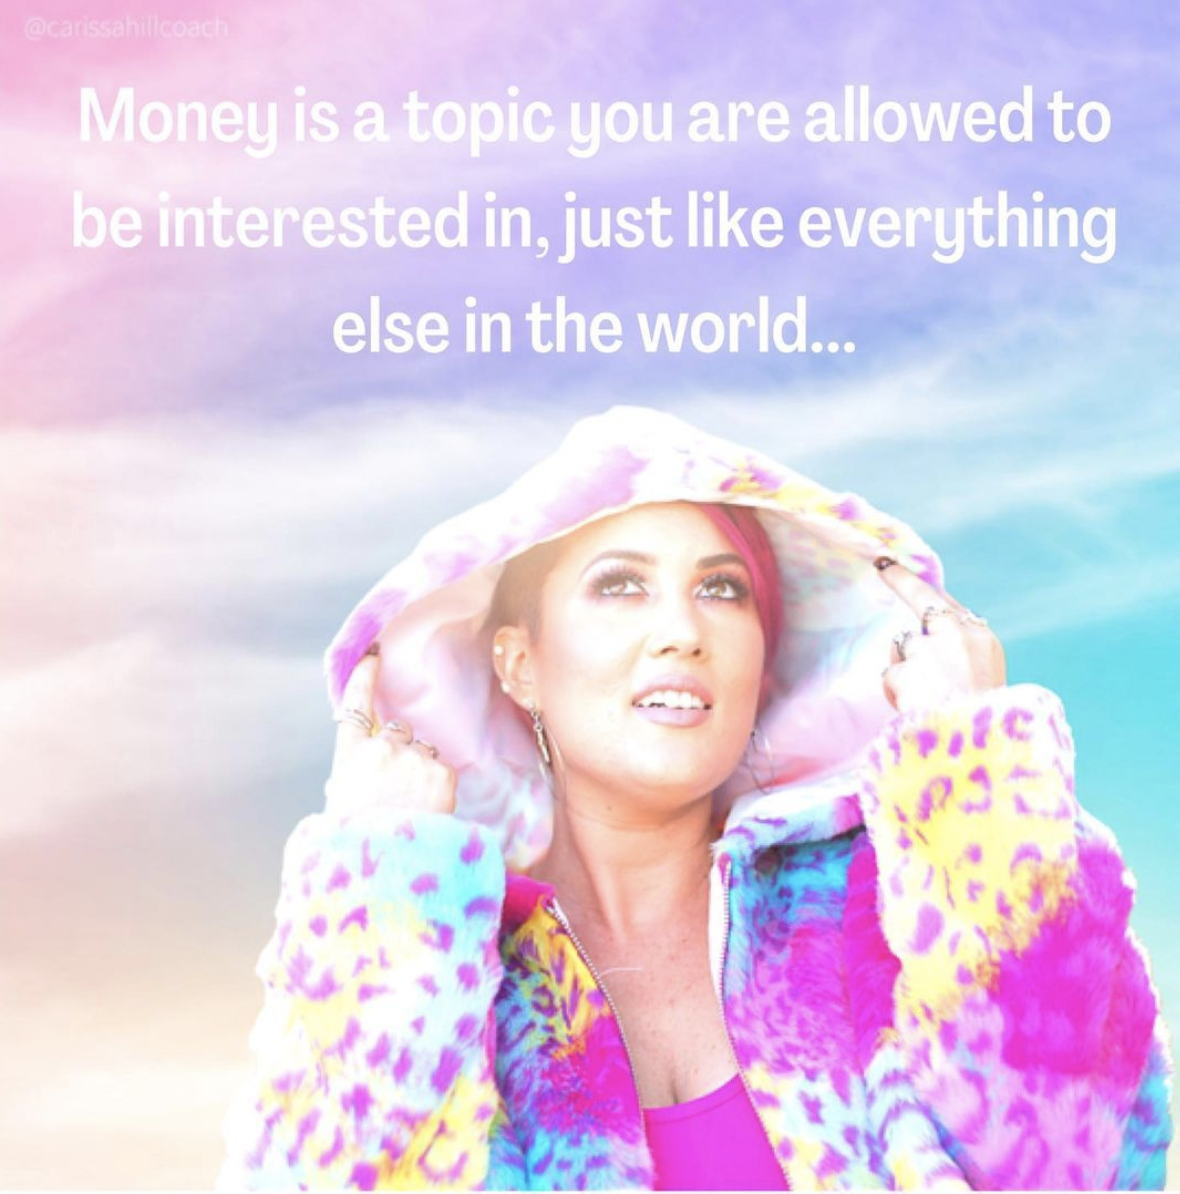 Money is a topic you are allowed to be interested in, just like everything else in the world…